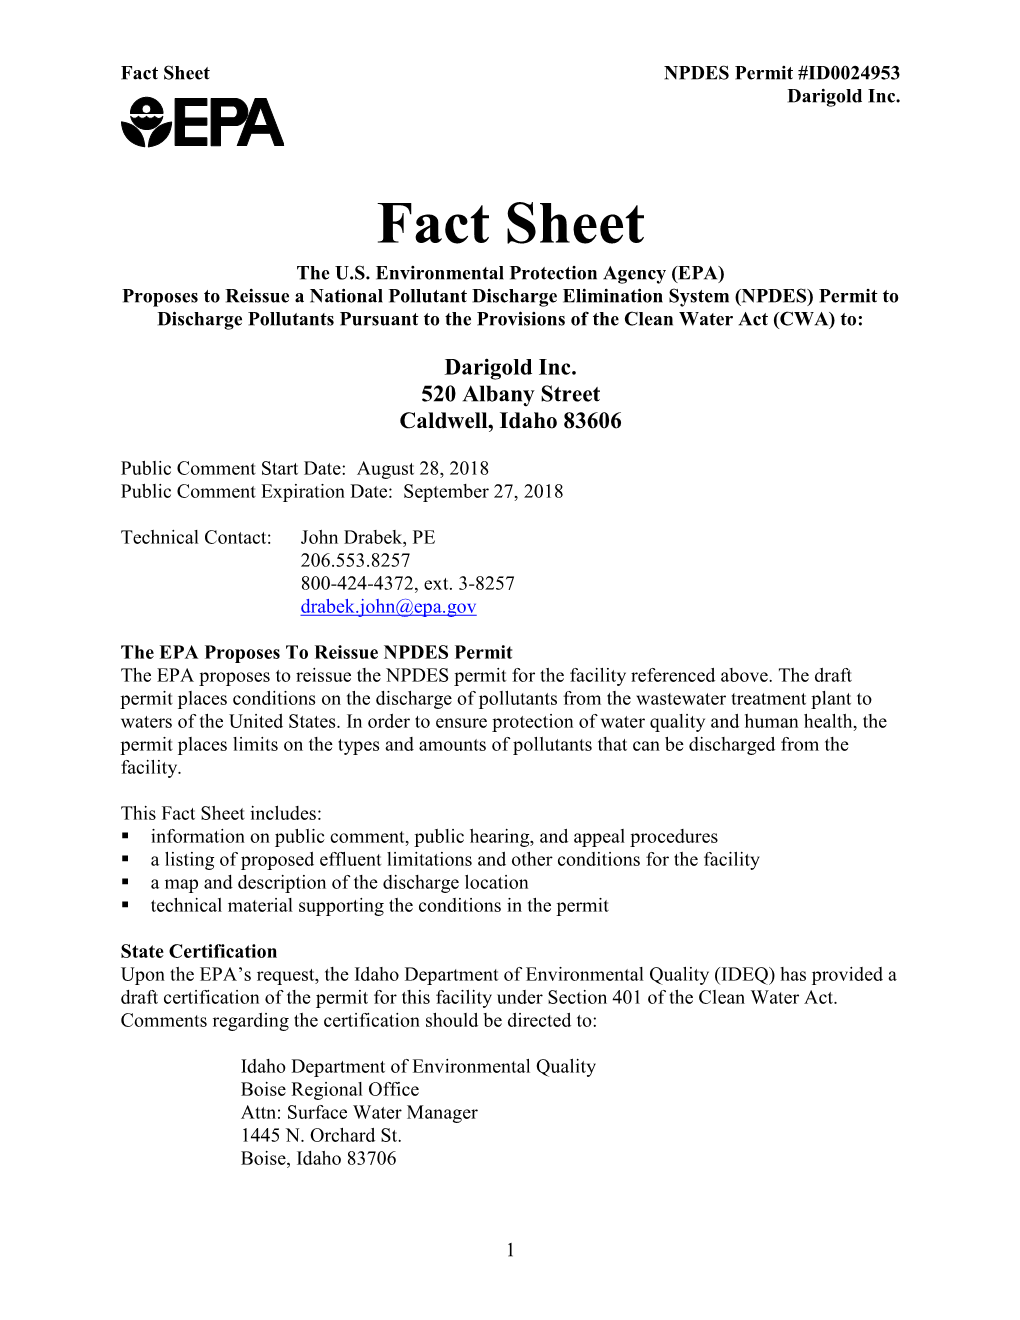 Fact Sheet for the Draft NPDES Permit for Darigold, Inc